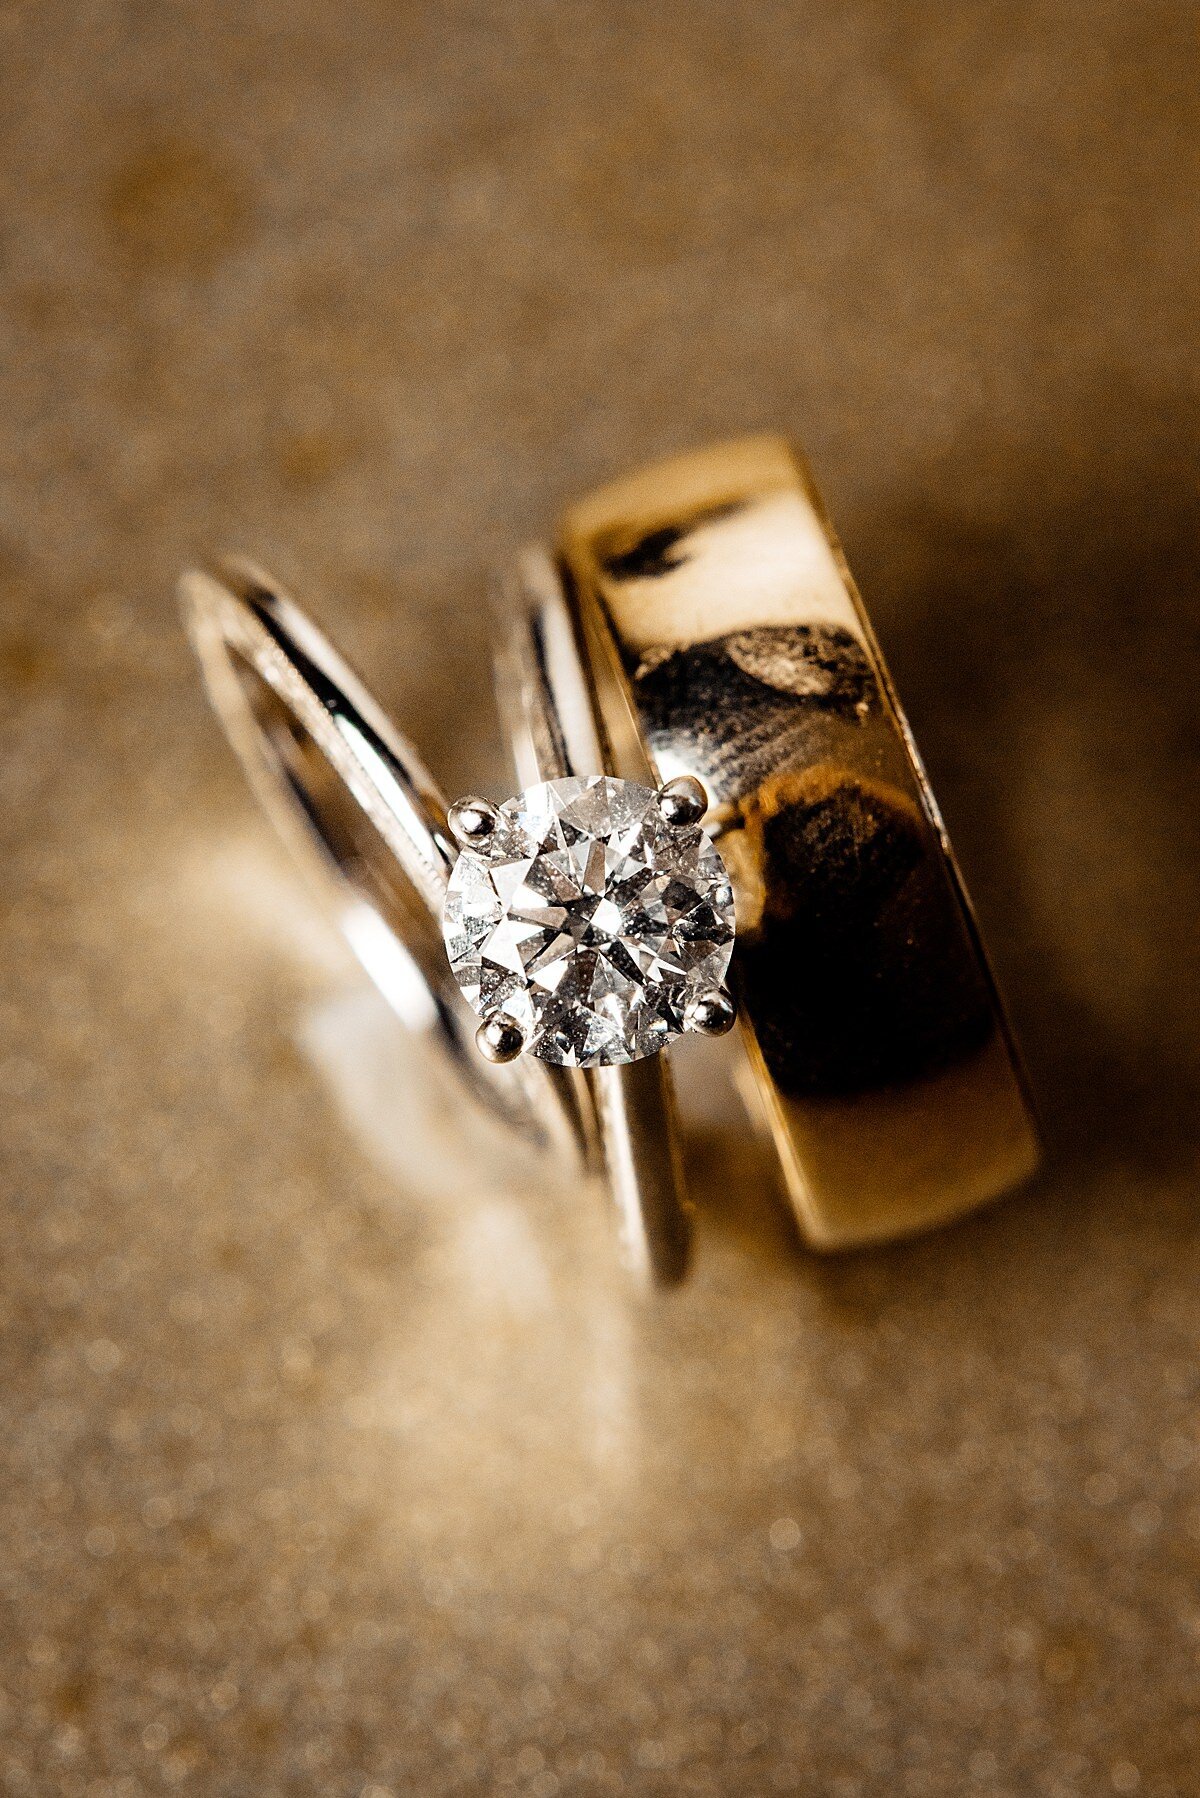 gold wedding bands on a gold background with a diamond solitare engagement ring.